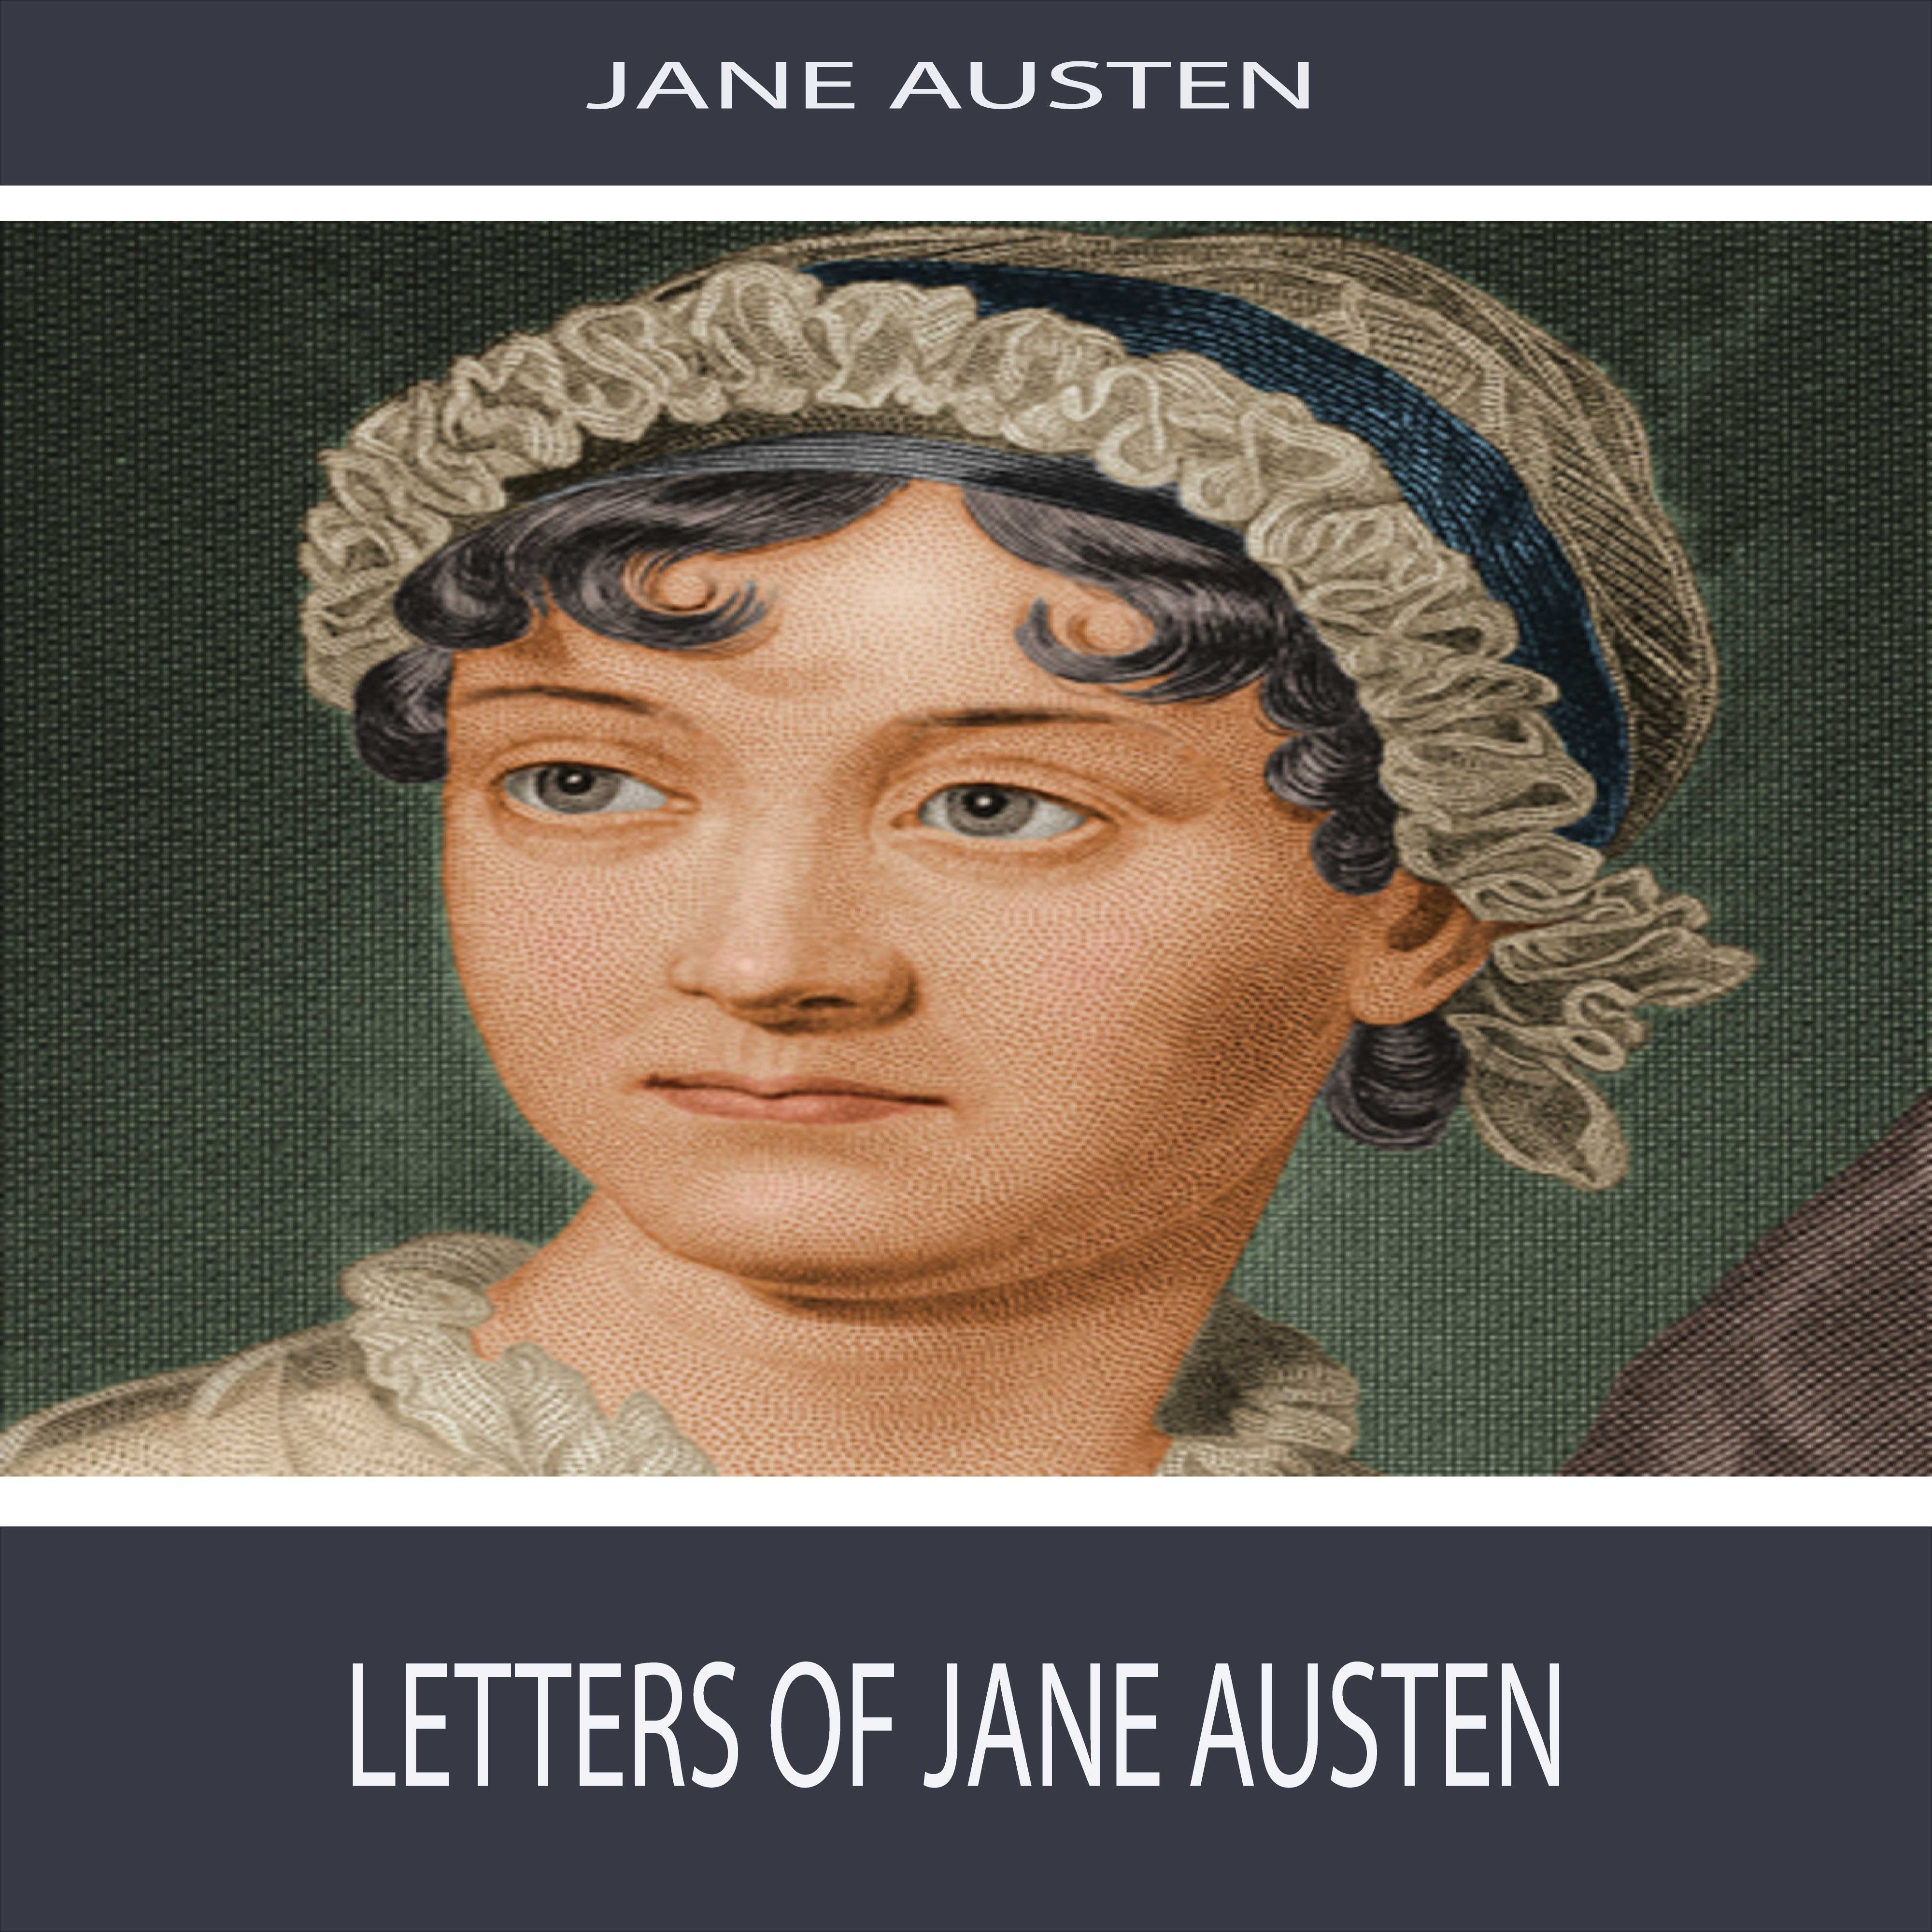 Letters of Jane Austen: Section 3